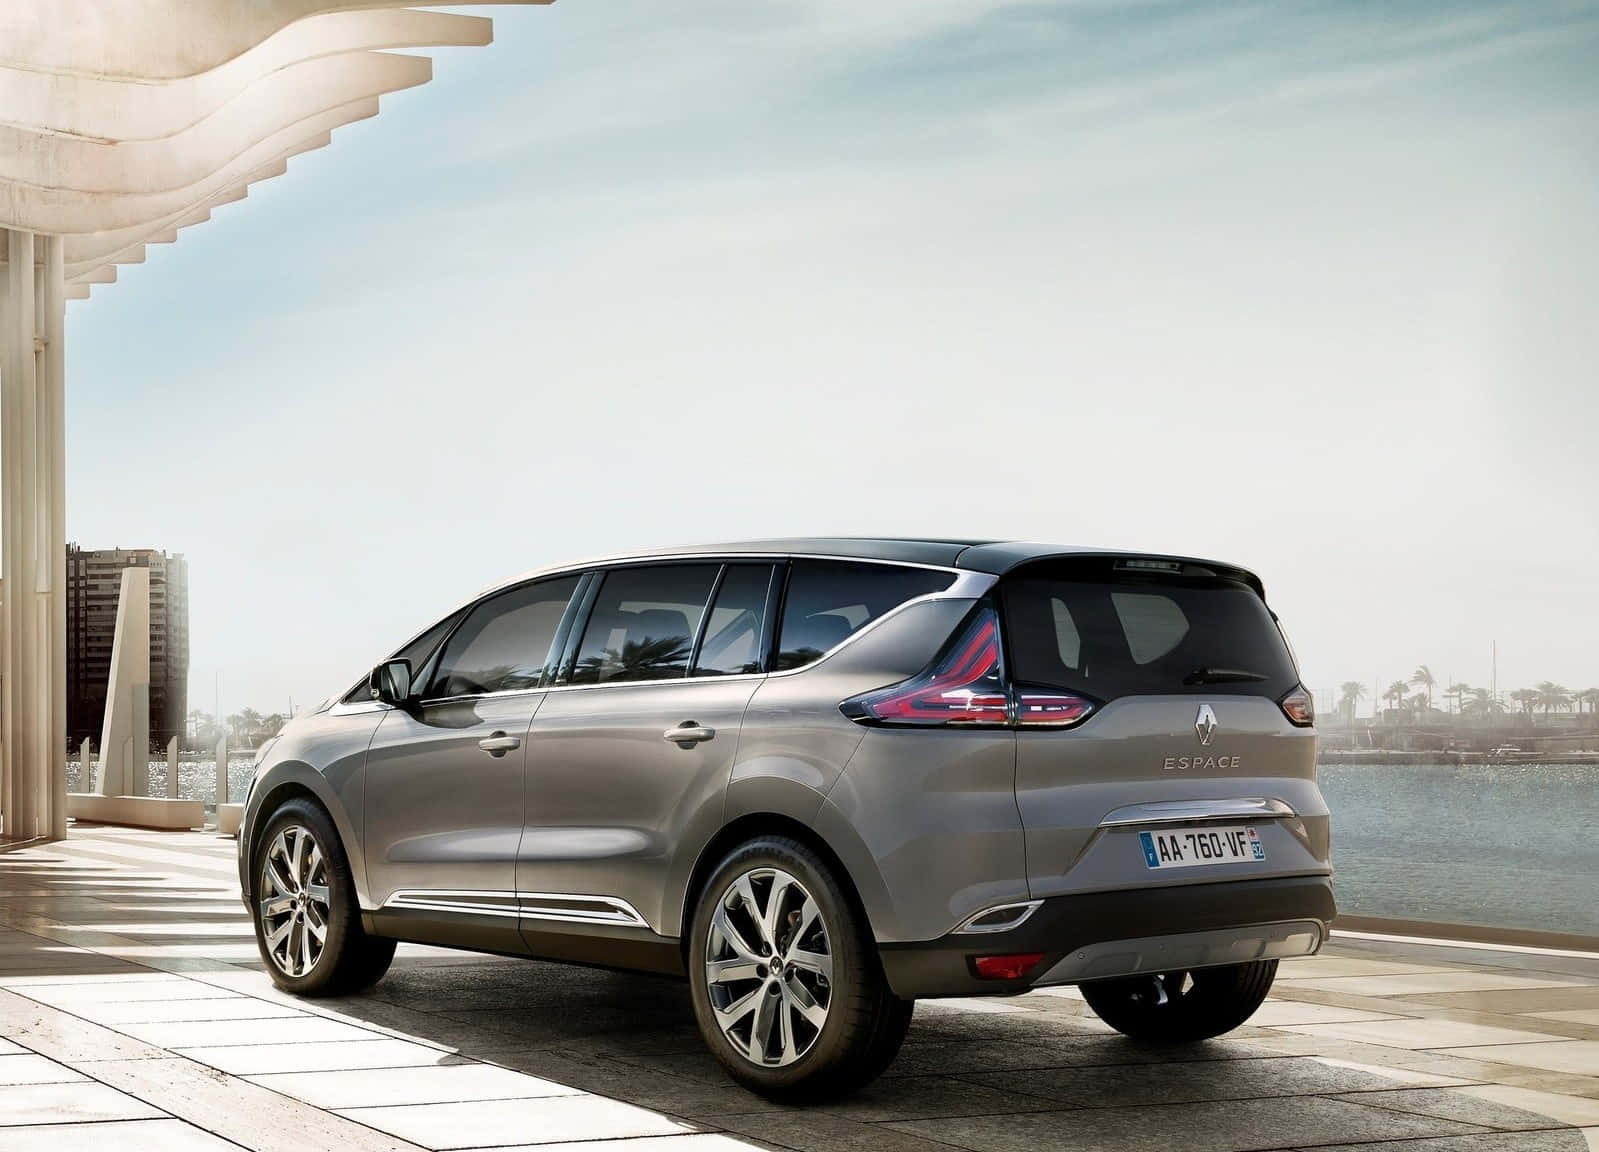 The Stylish Renault Espace In Motion Wallpaper